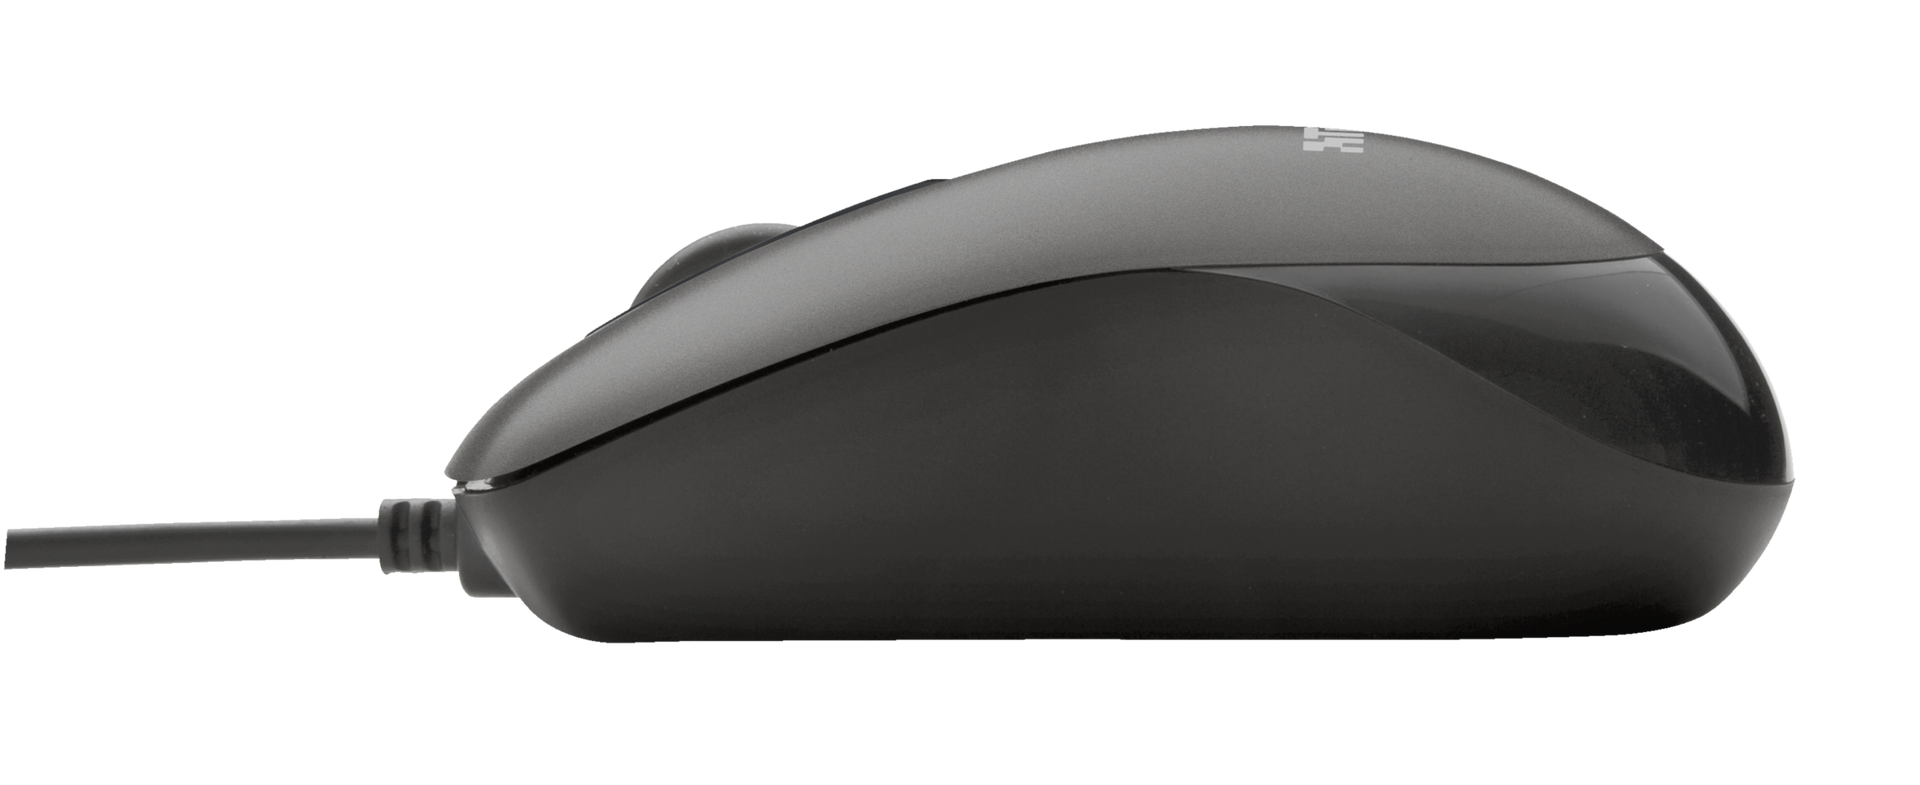 Evano Compact Mouse-Side